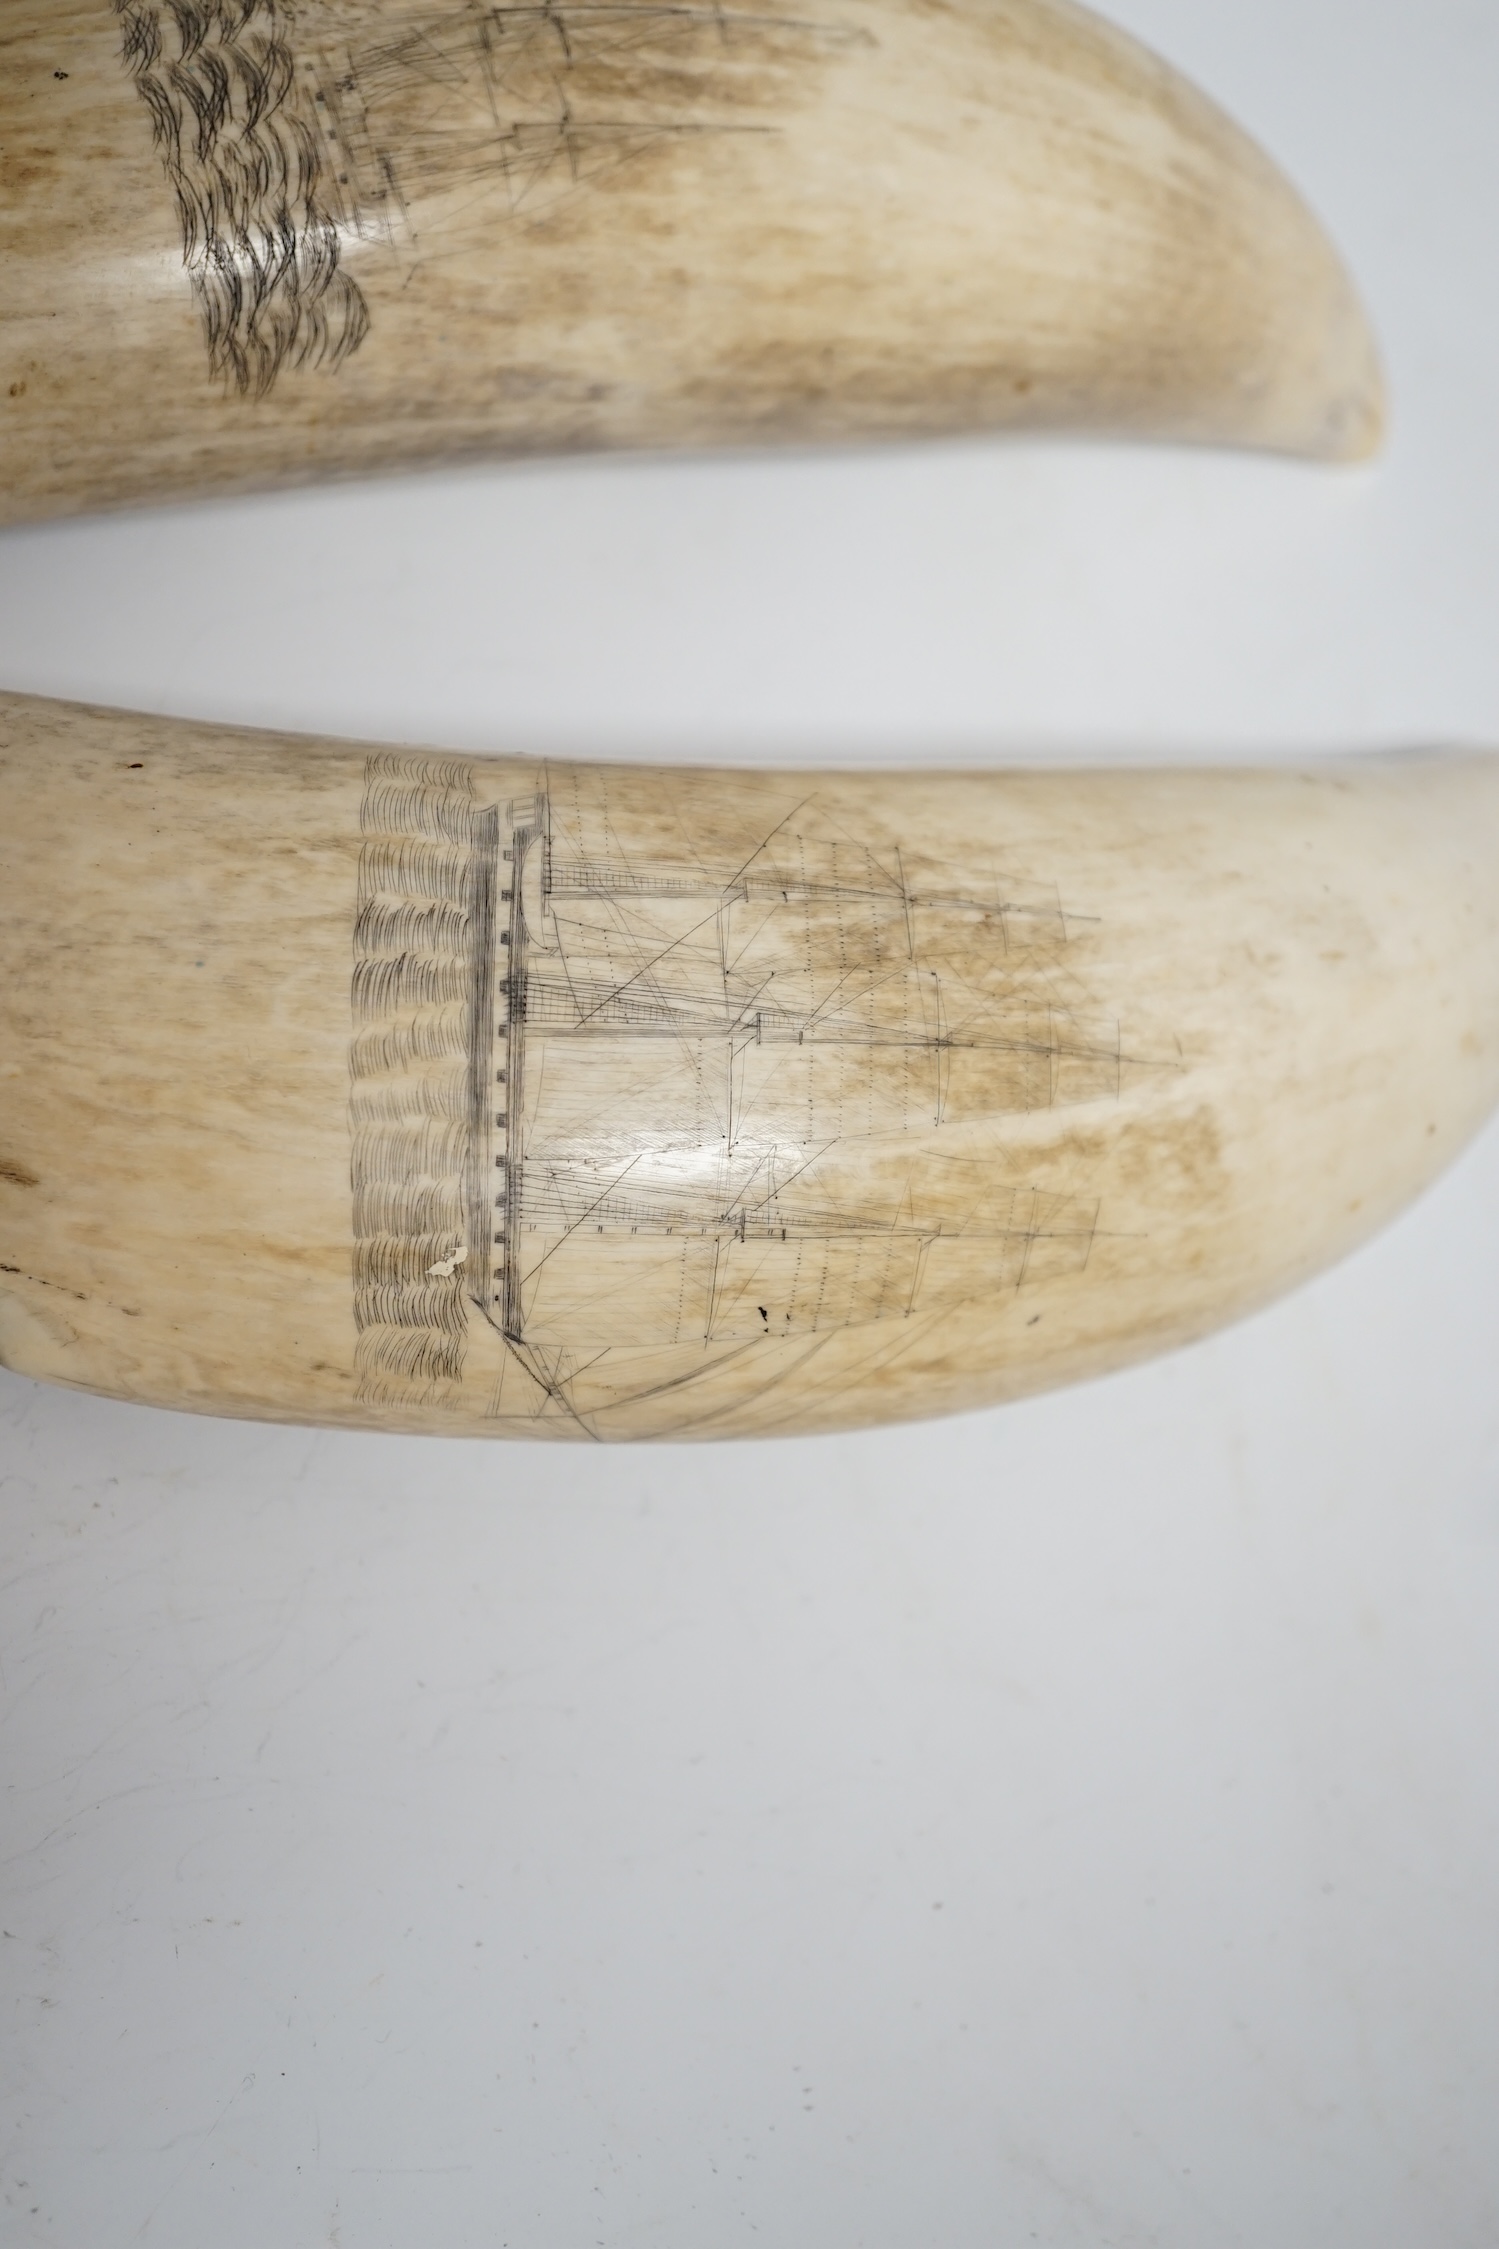 Two 19th century scrimshaw sperm whale teeth, each incised with a ship, 20cm in length